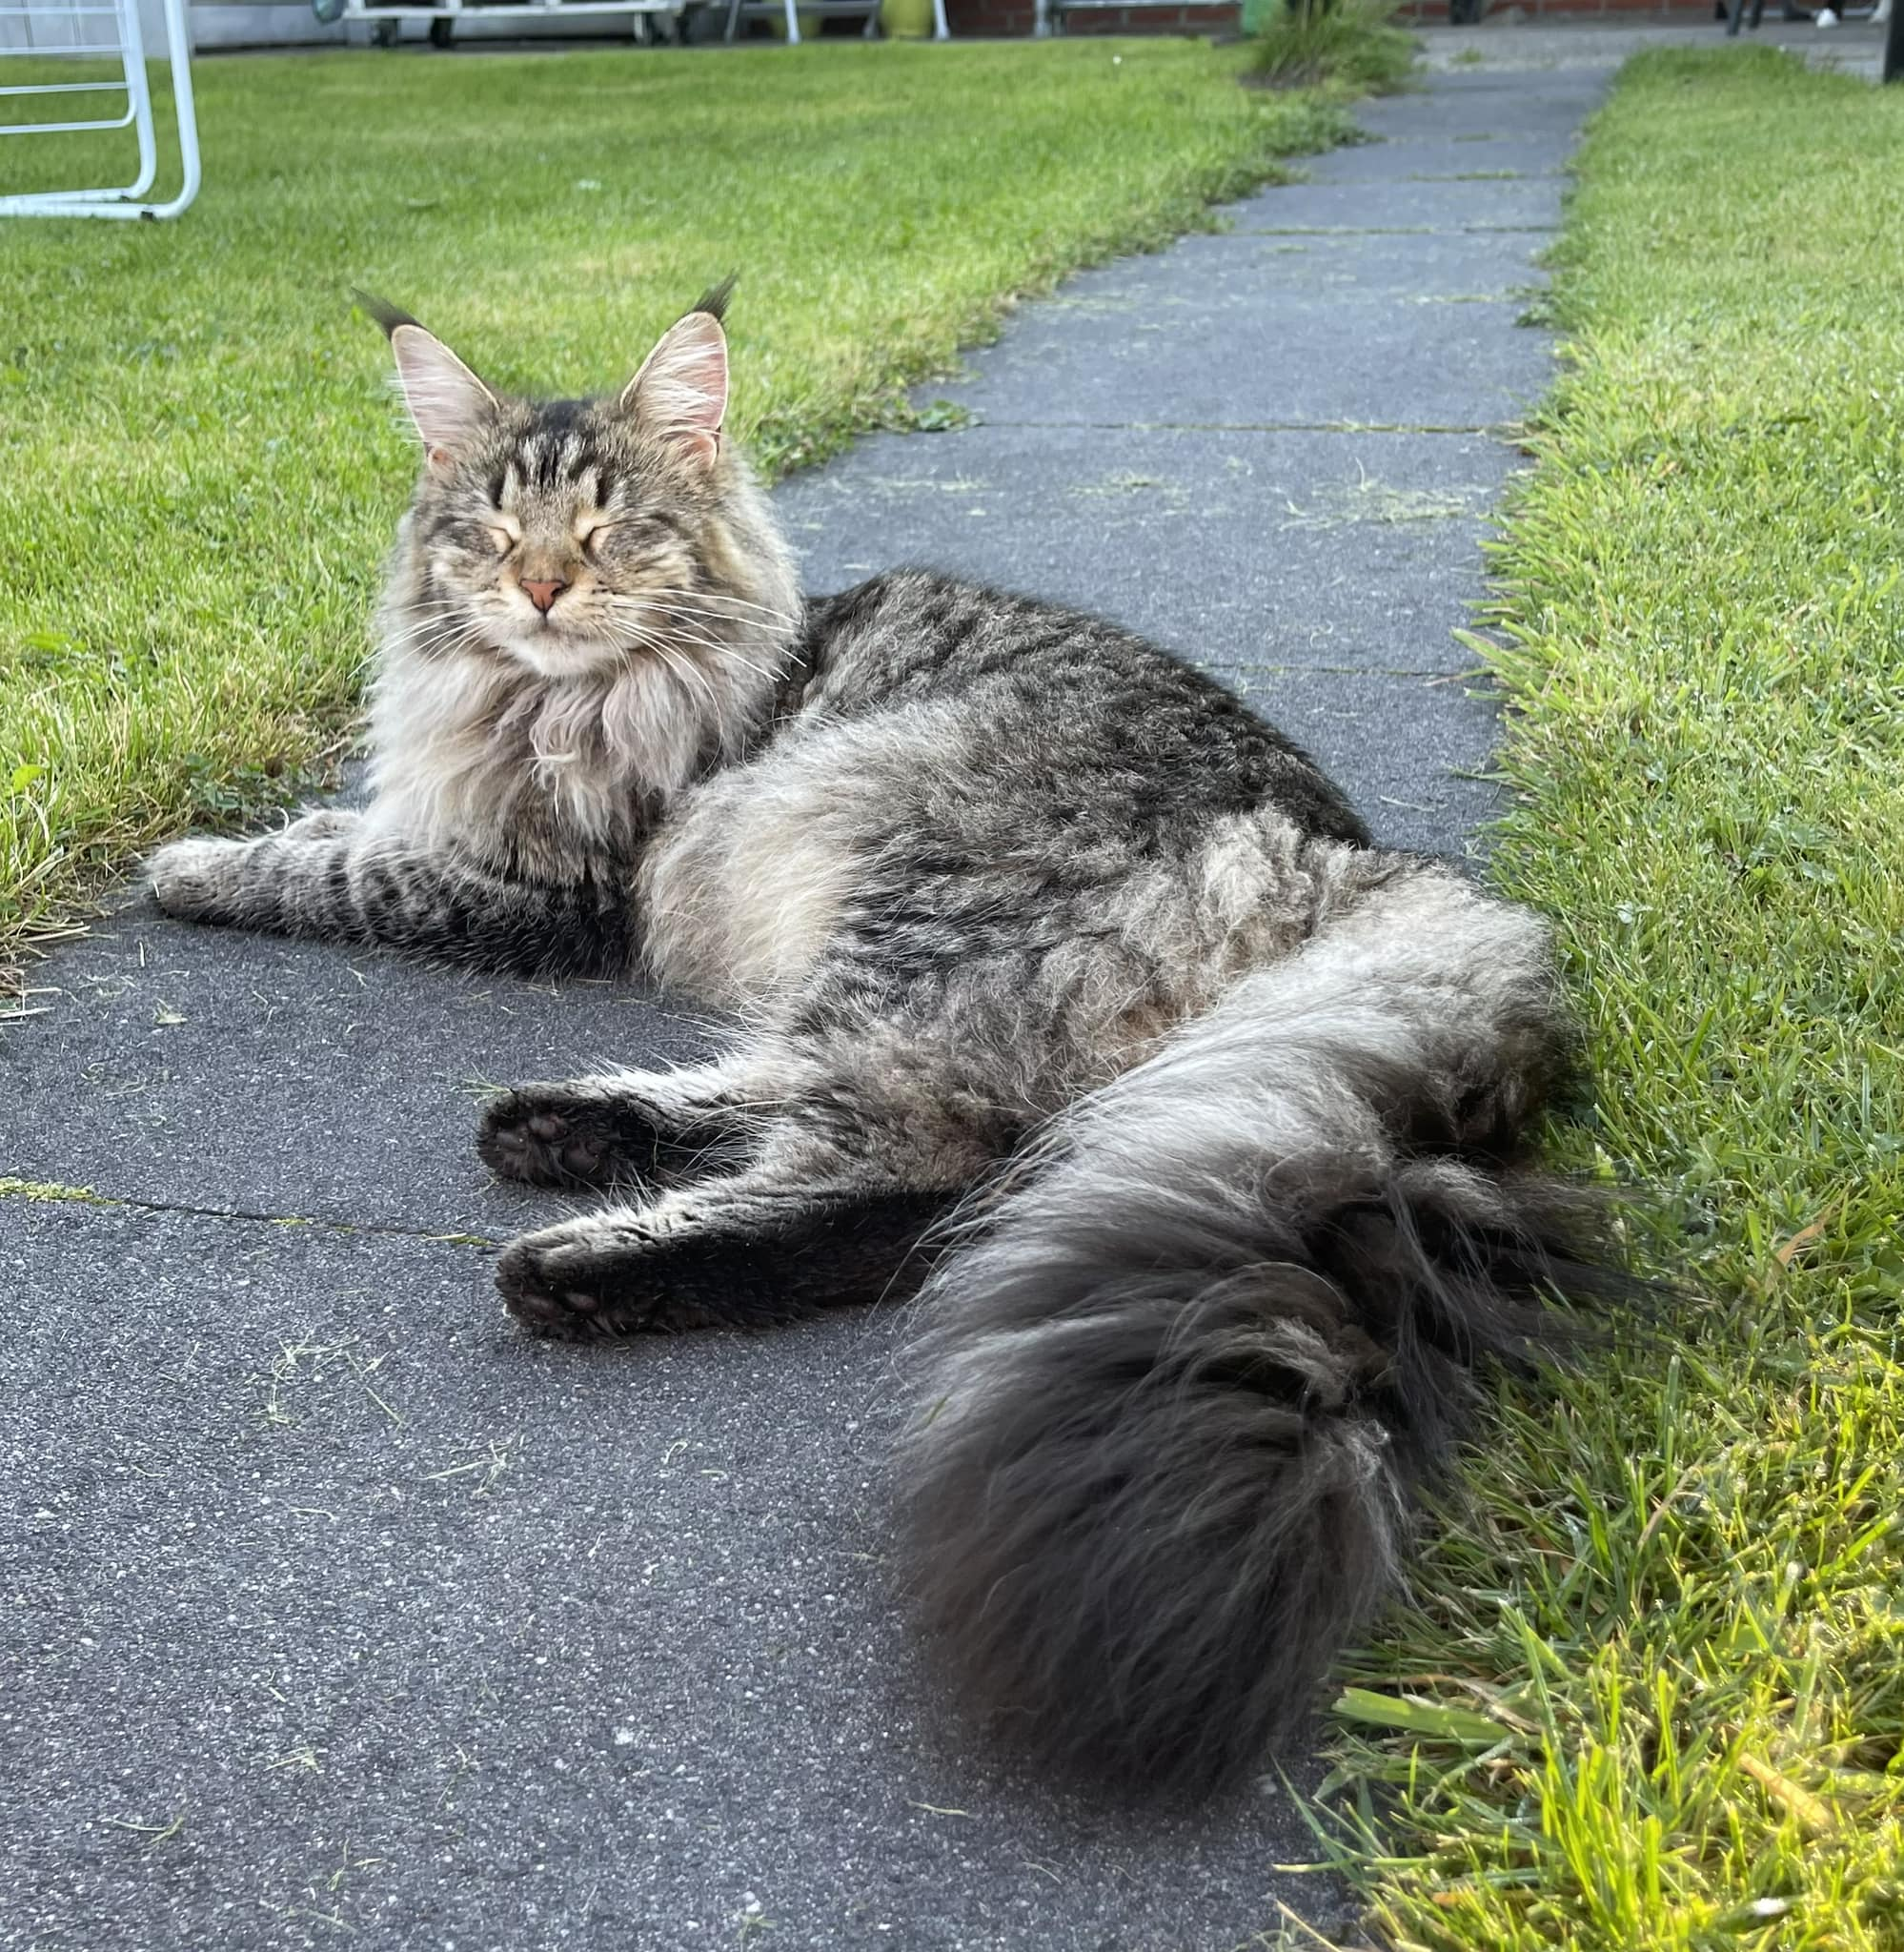 What are the common health issues in Maine Coon cats?